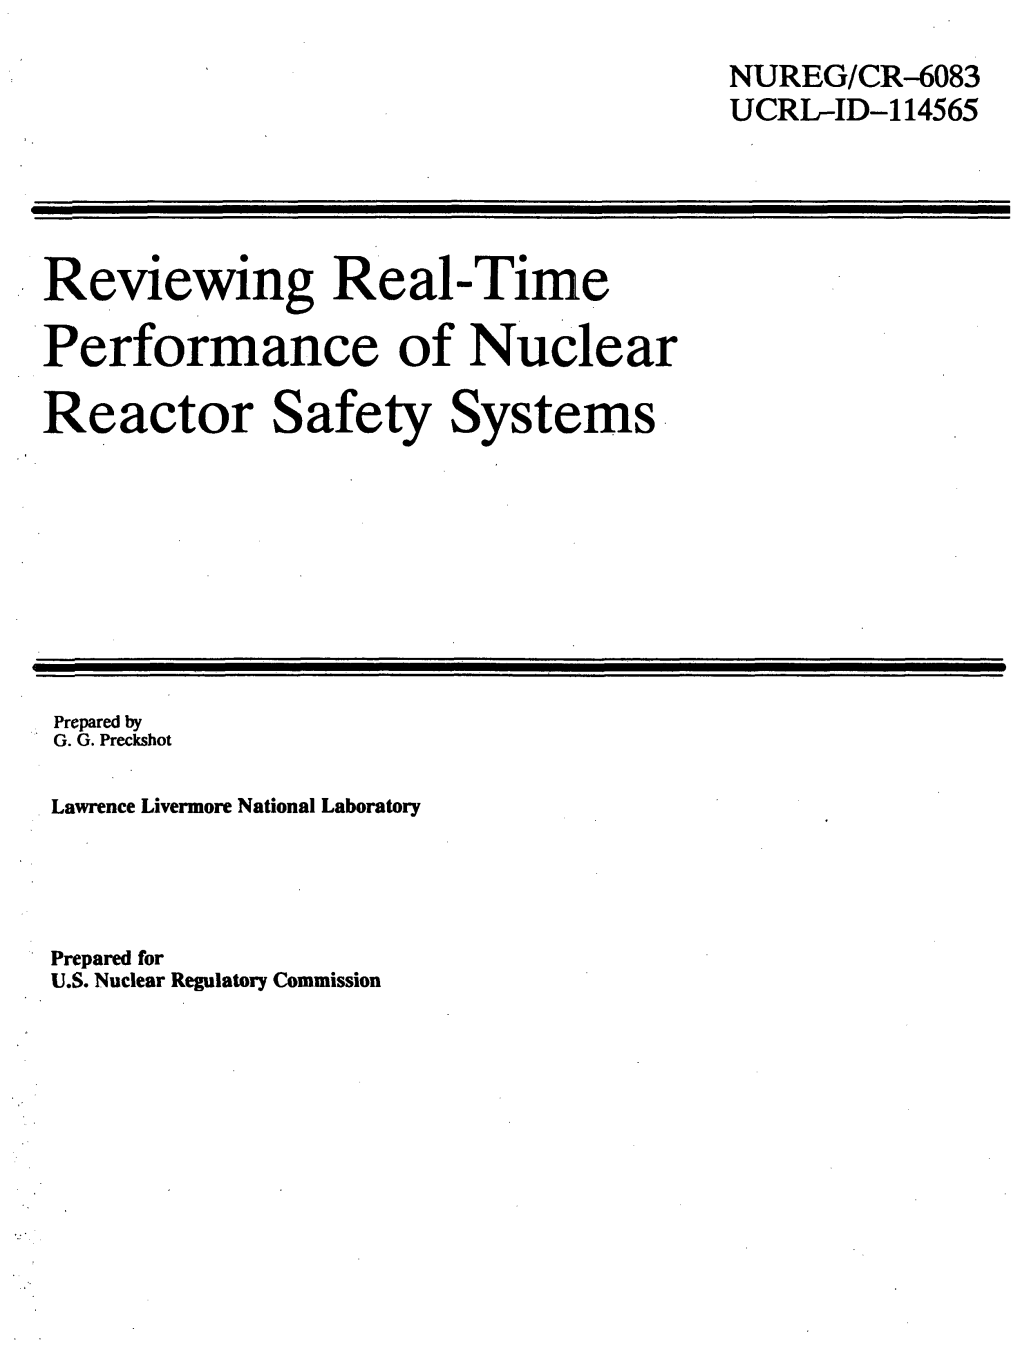 Reviewing Real-Time Performance of Nuclear Reactor Safety Systems